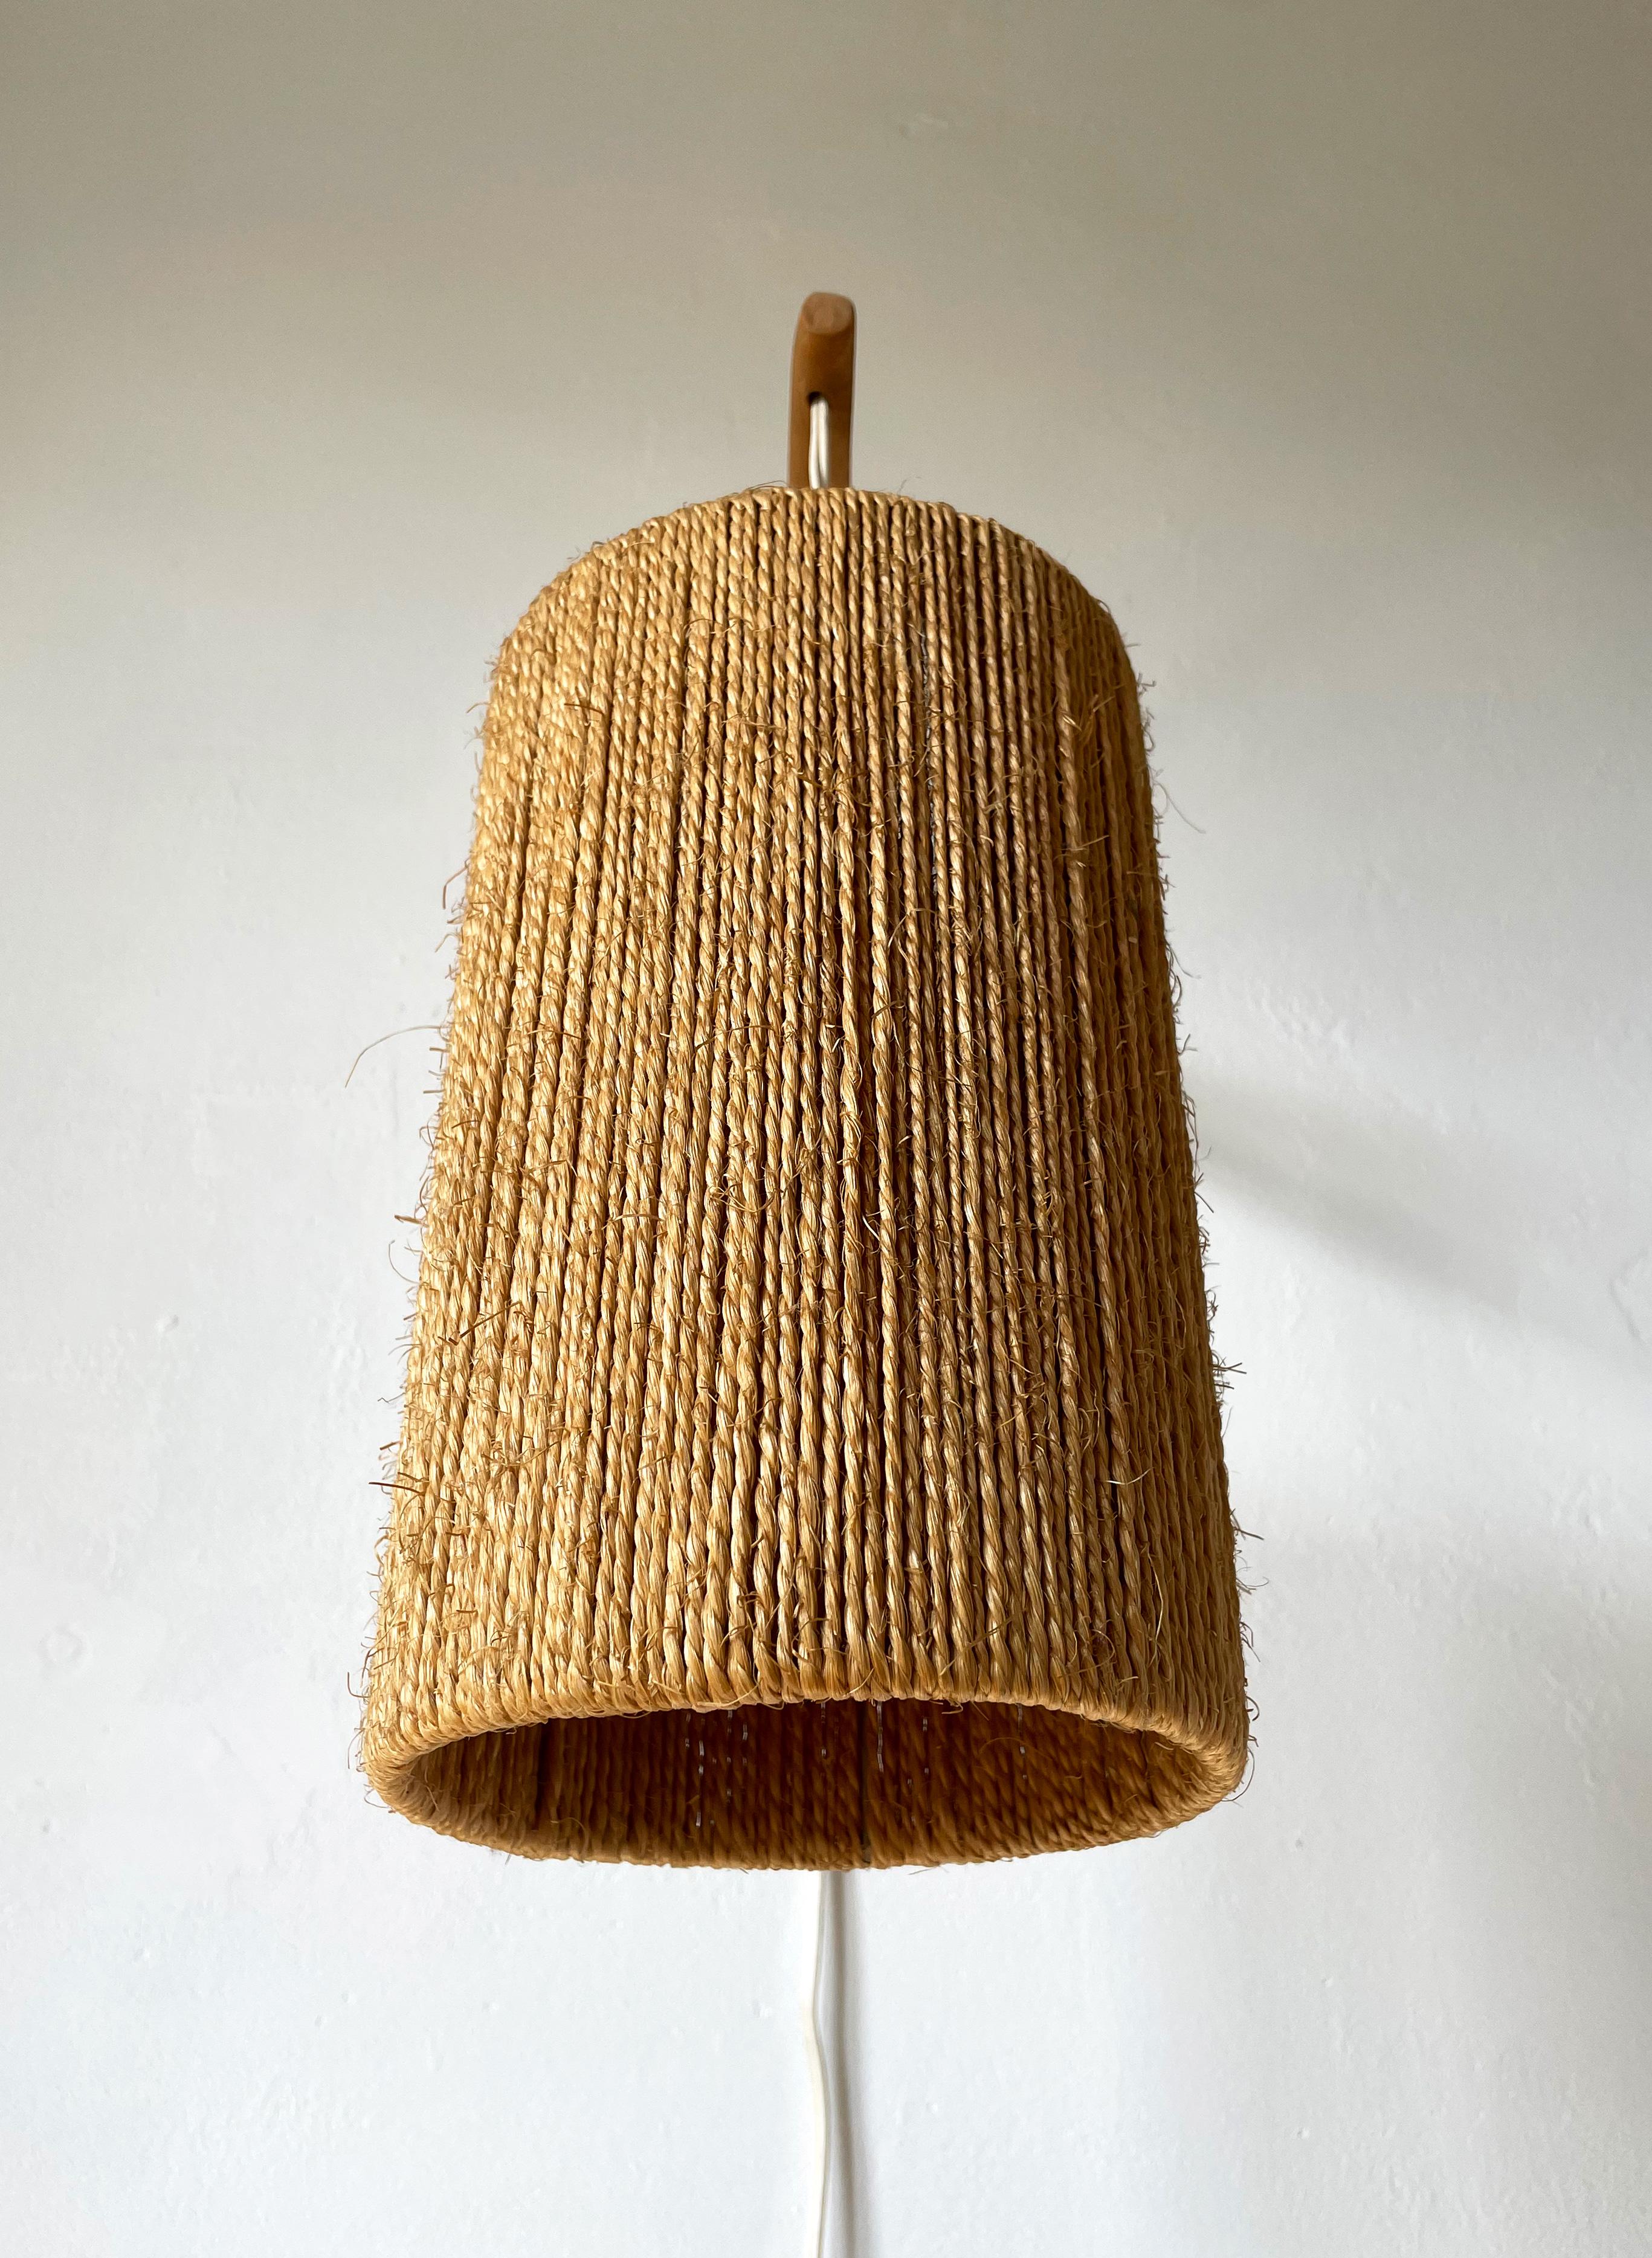 Hand-Crafted Danish Modern Fog & Morup Style Papercord Wall Light, 1950s For Sale